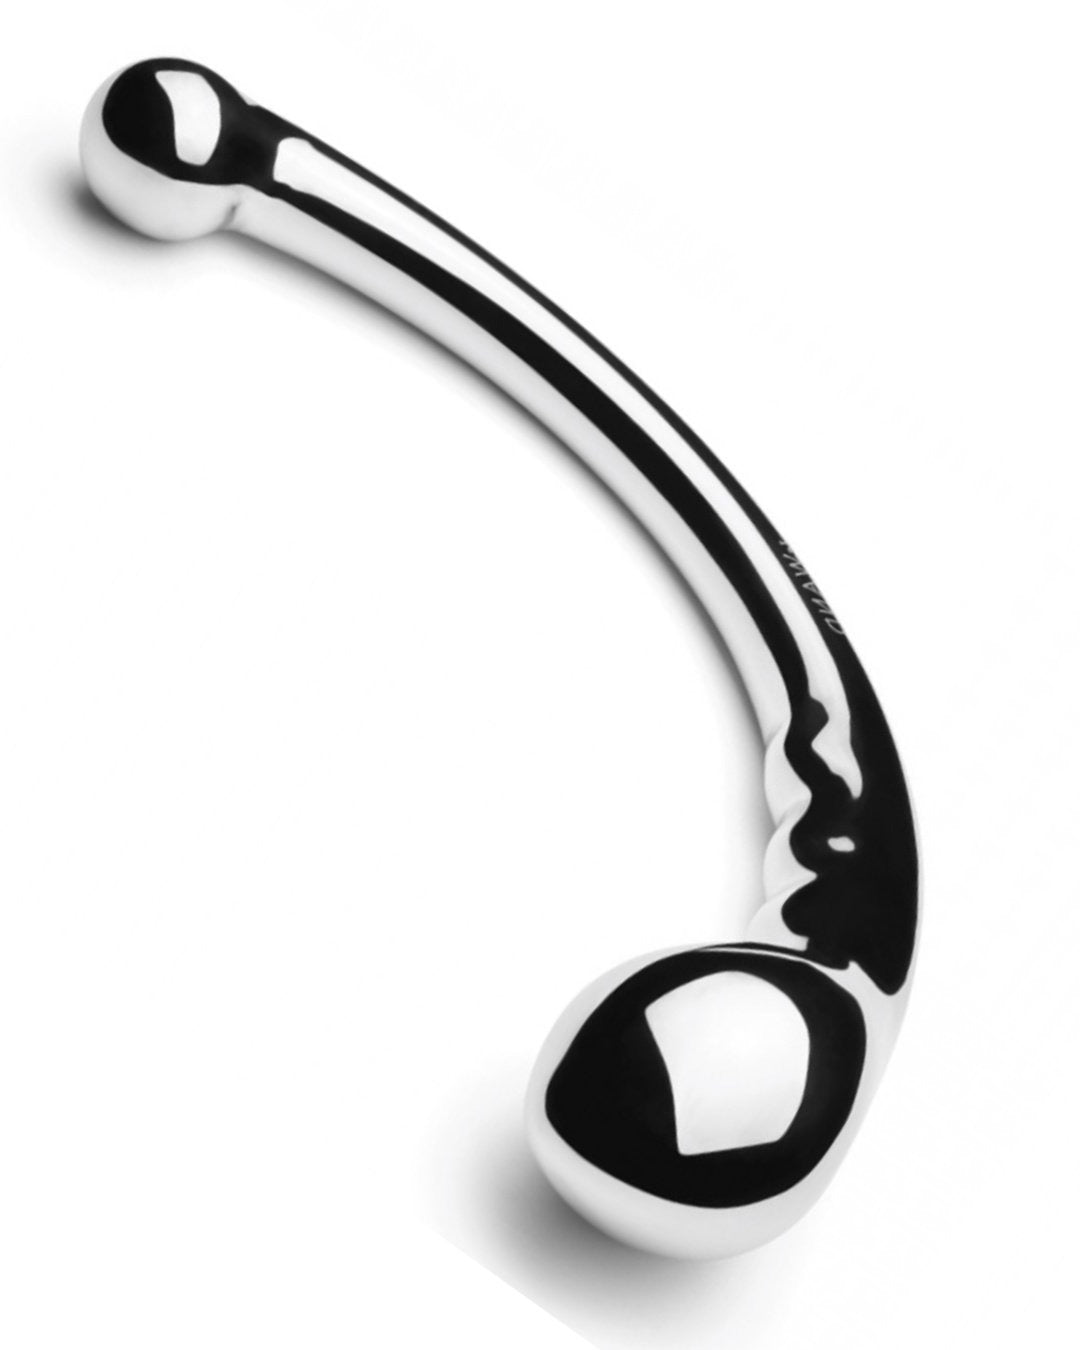 Le Wand Hoop Double Ended Stainless Steel Dildo against a white background, with the larger bulb towards the viewer tilted to show the curve and pleasure ridges